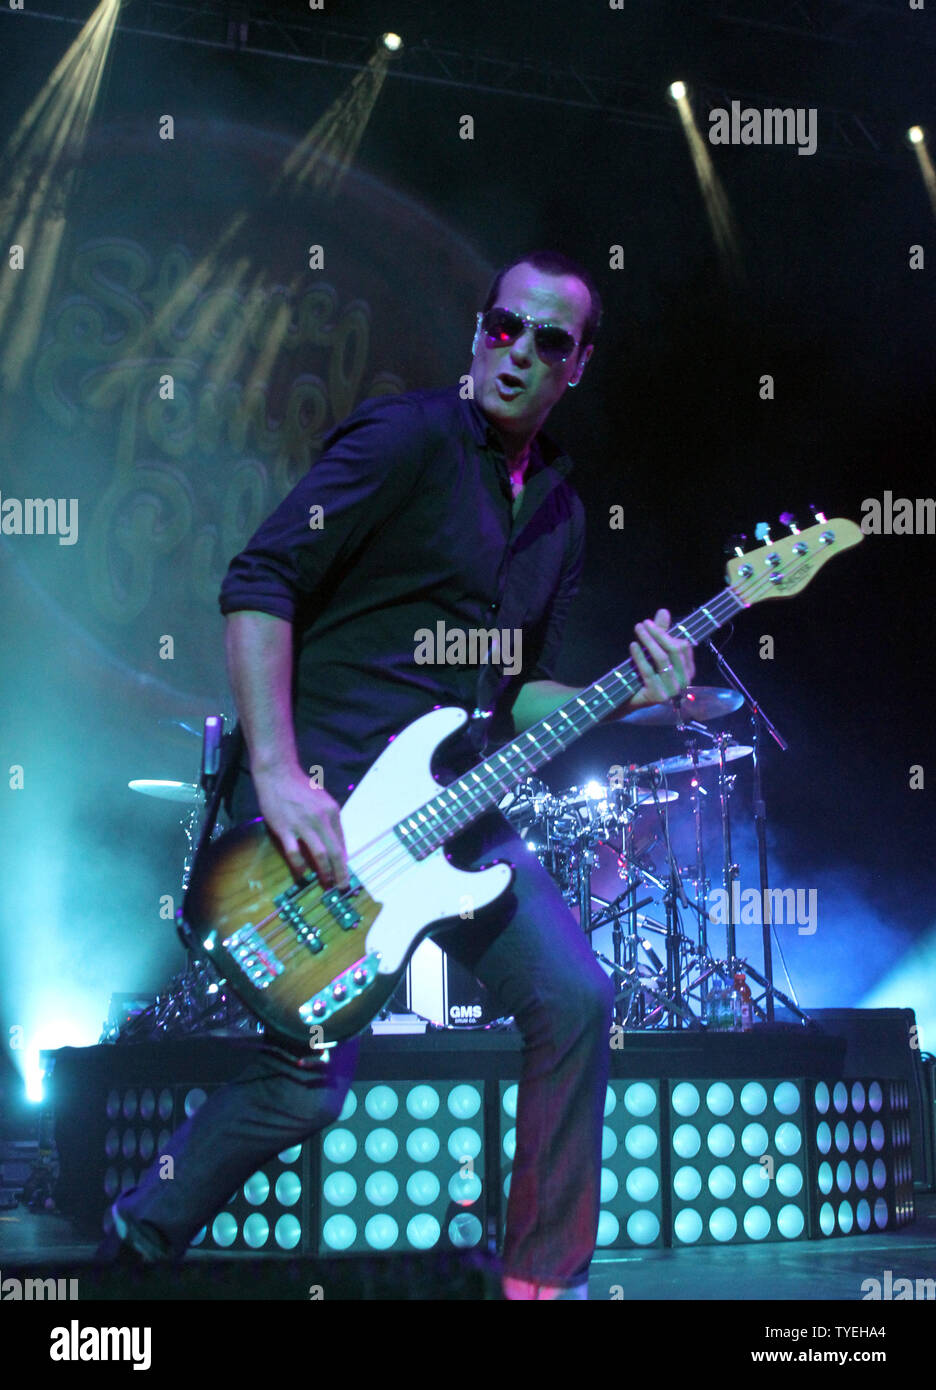 Robert DeLeo with Stone Temple Pilots performs at the BB & T Center in Sunrise, Florida on September 17, 2013.  UPI/Michael Bush Stock Photo